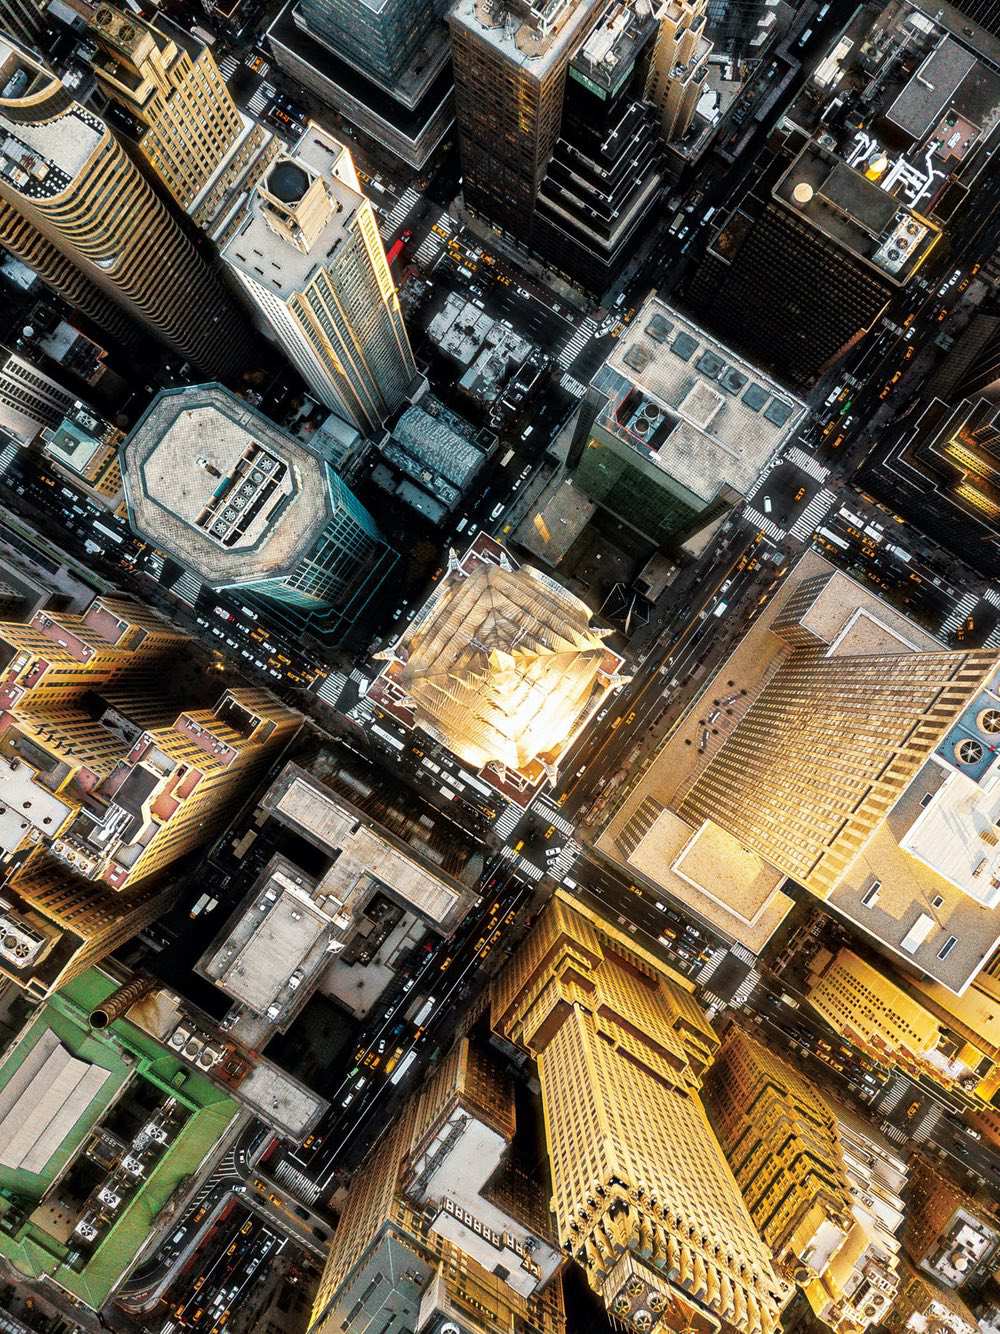 Chrysler Building - Amazing drone photos of New York City looking straight down 0000